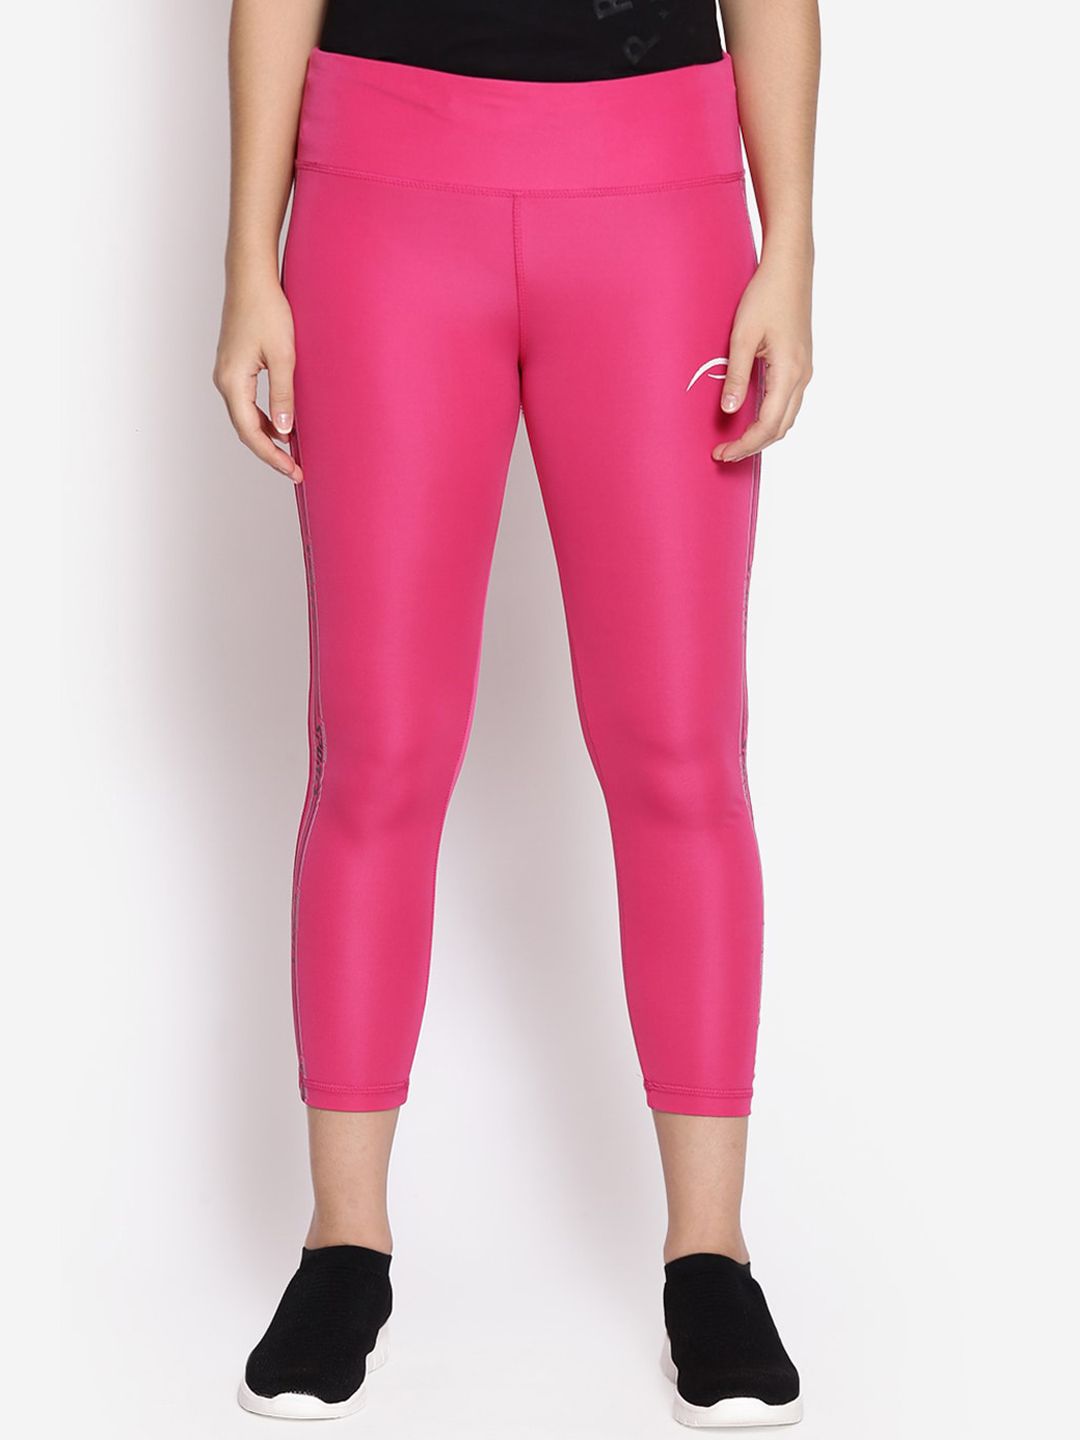 Proline Women Pink Solid Tights Price in India